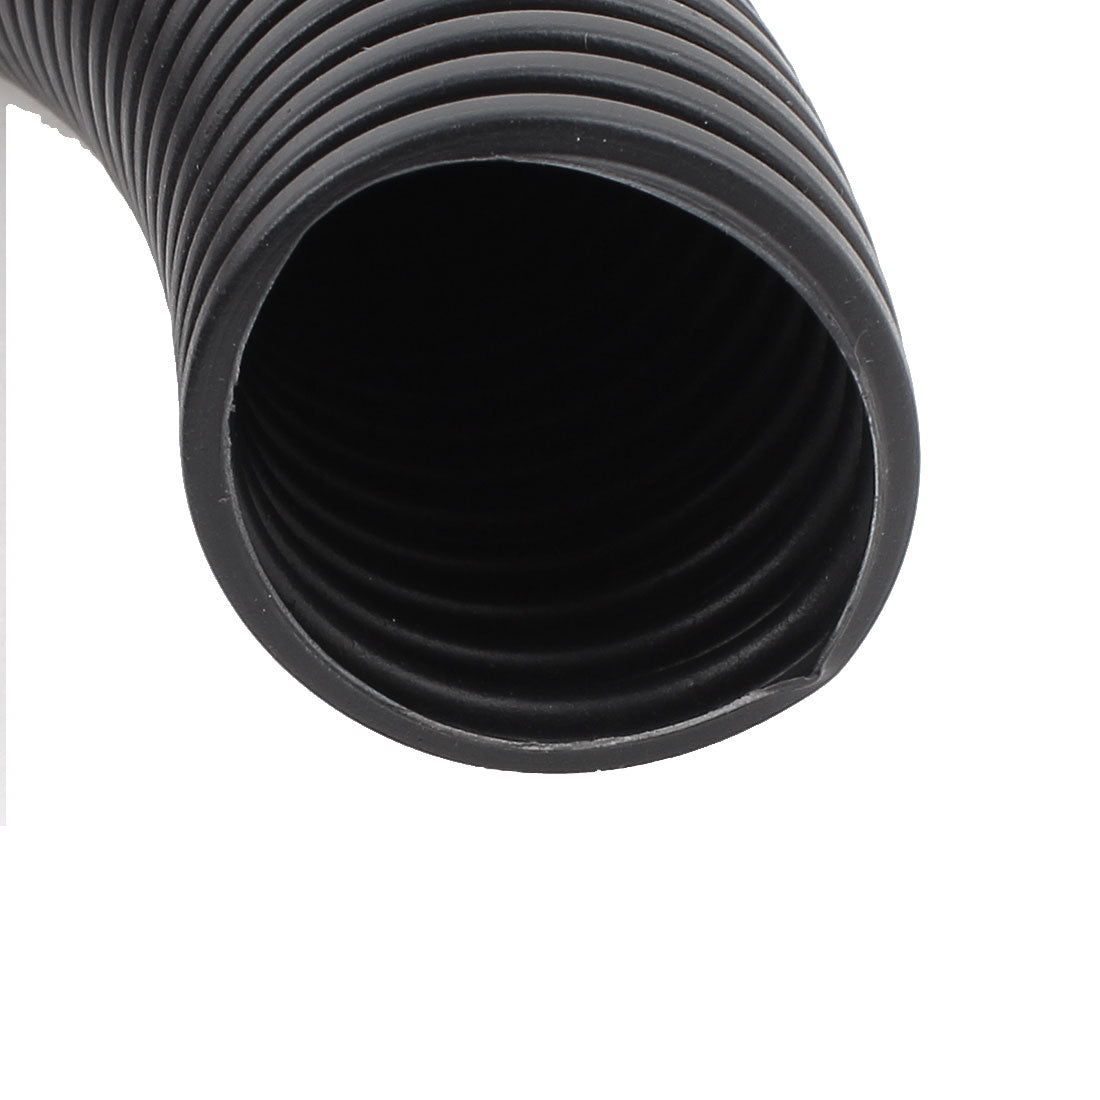 uxcell Uxcell 4 M 35 x 42 mm Plastic Flexible Corrugated Conduit Tube for Garden,Office Black